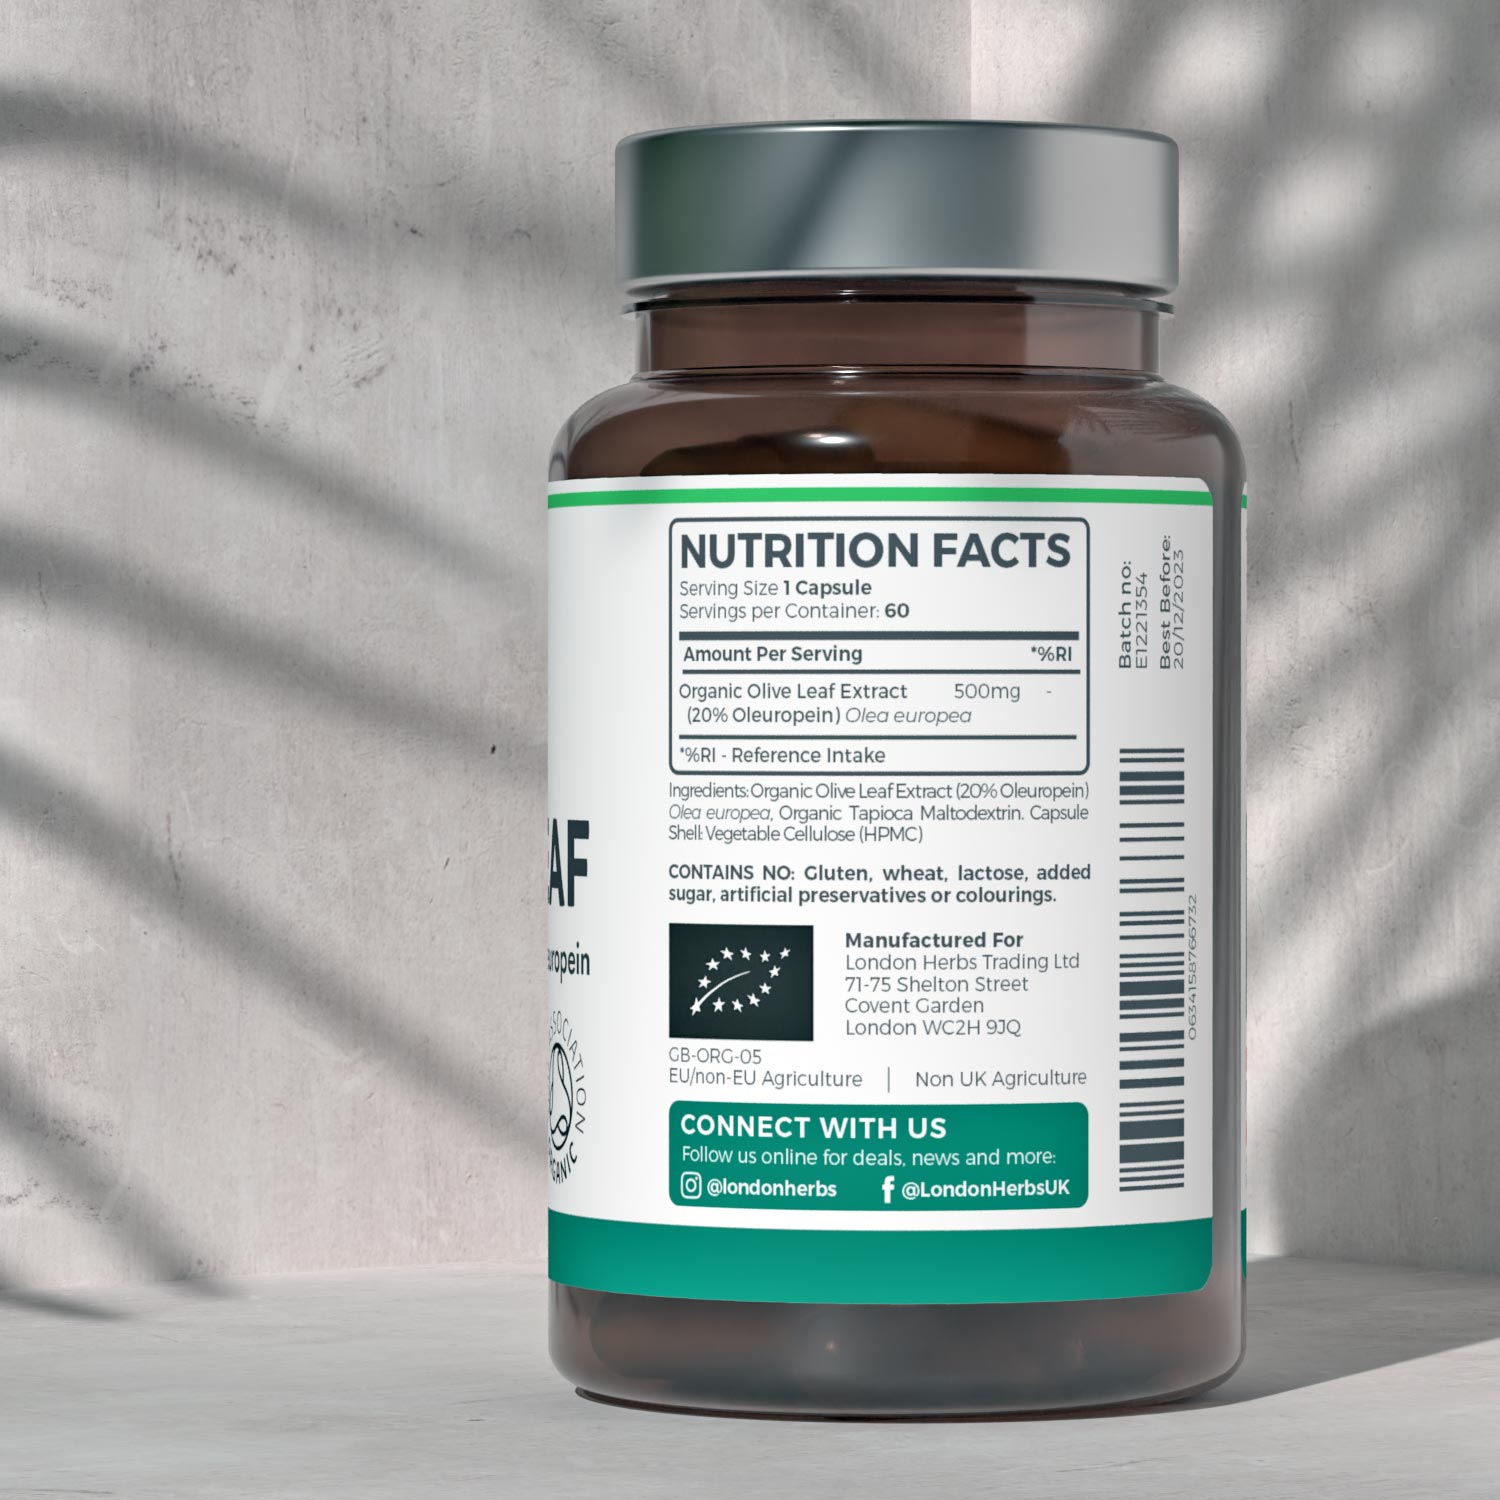 Olive Leaf Extract label showing nutritional information and ingredients